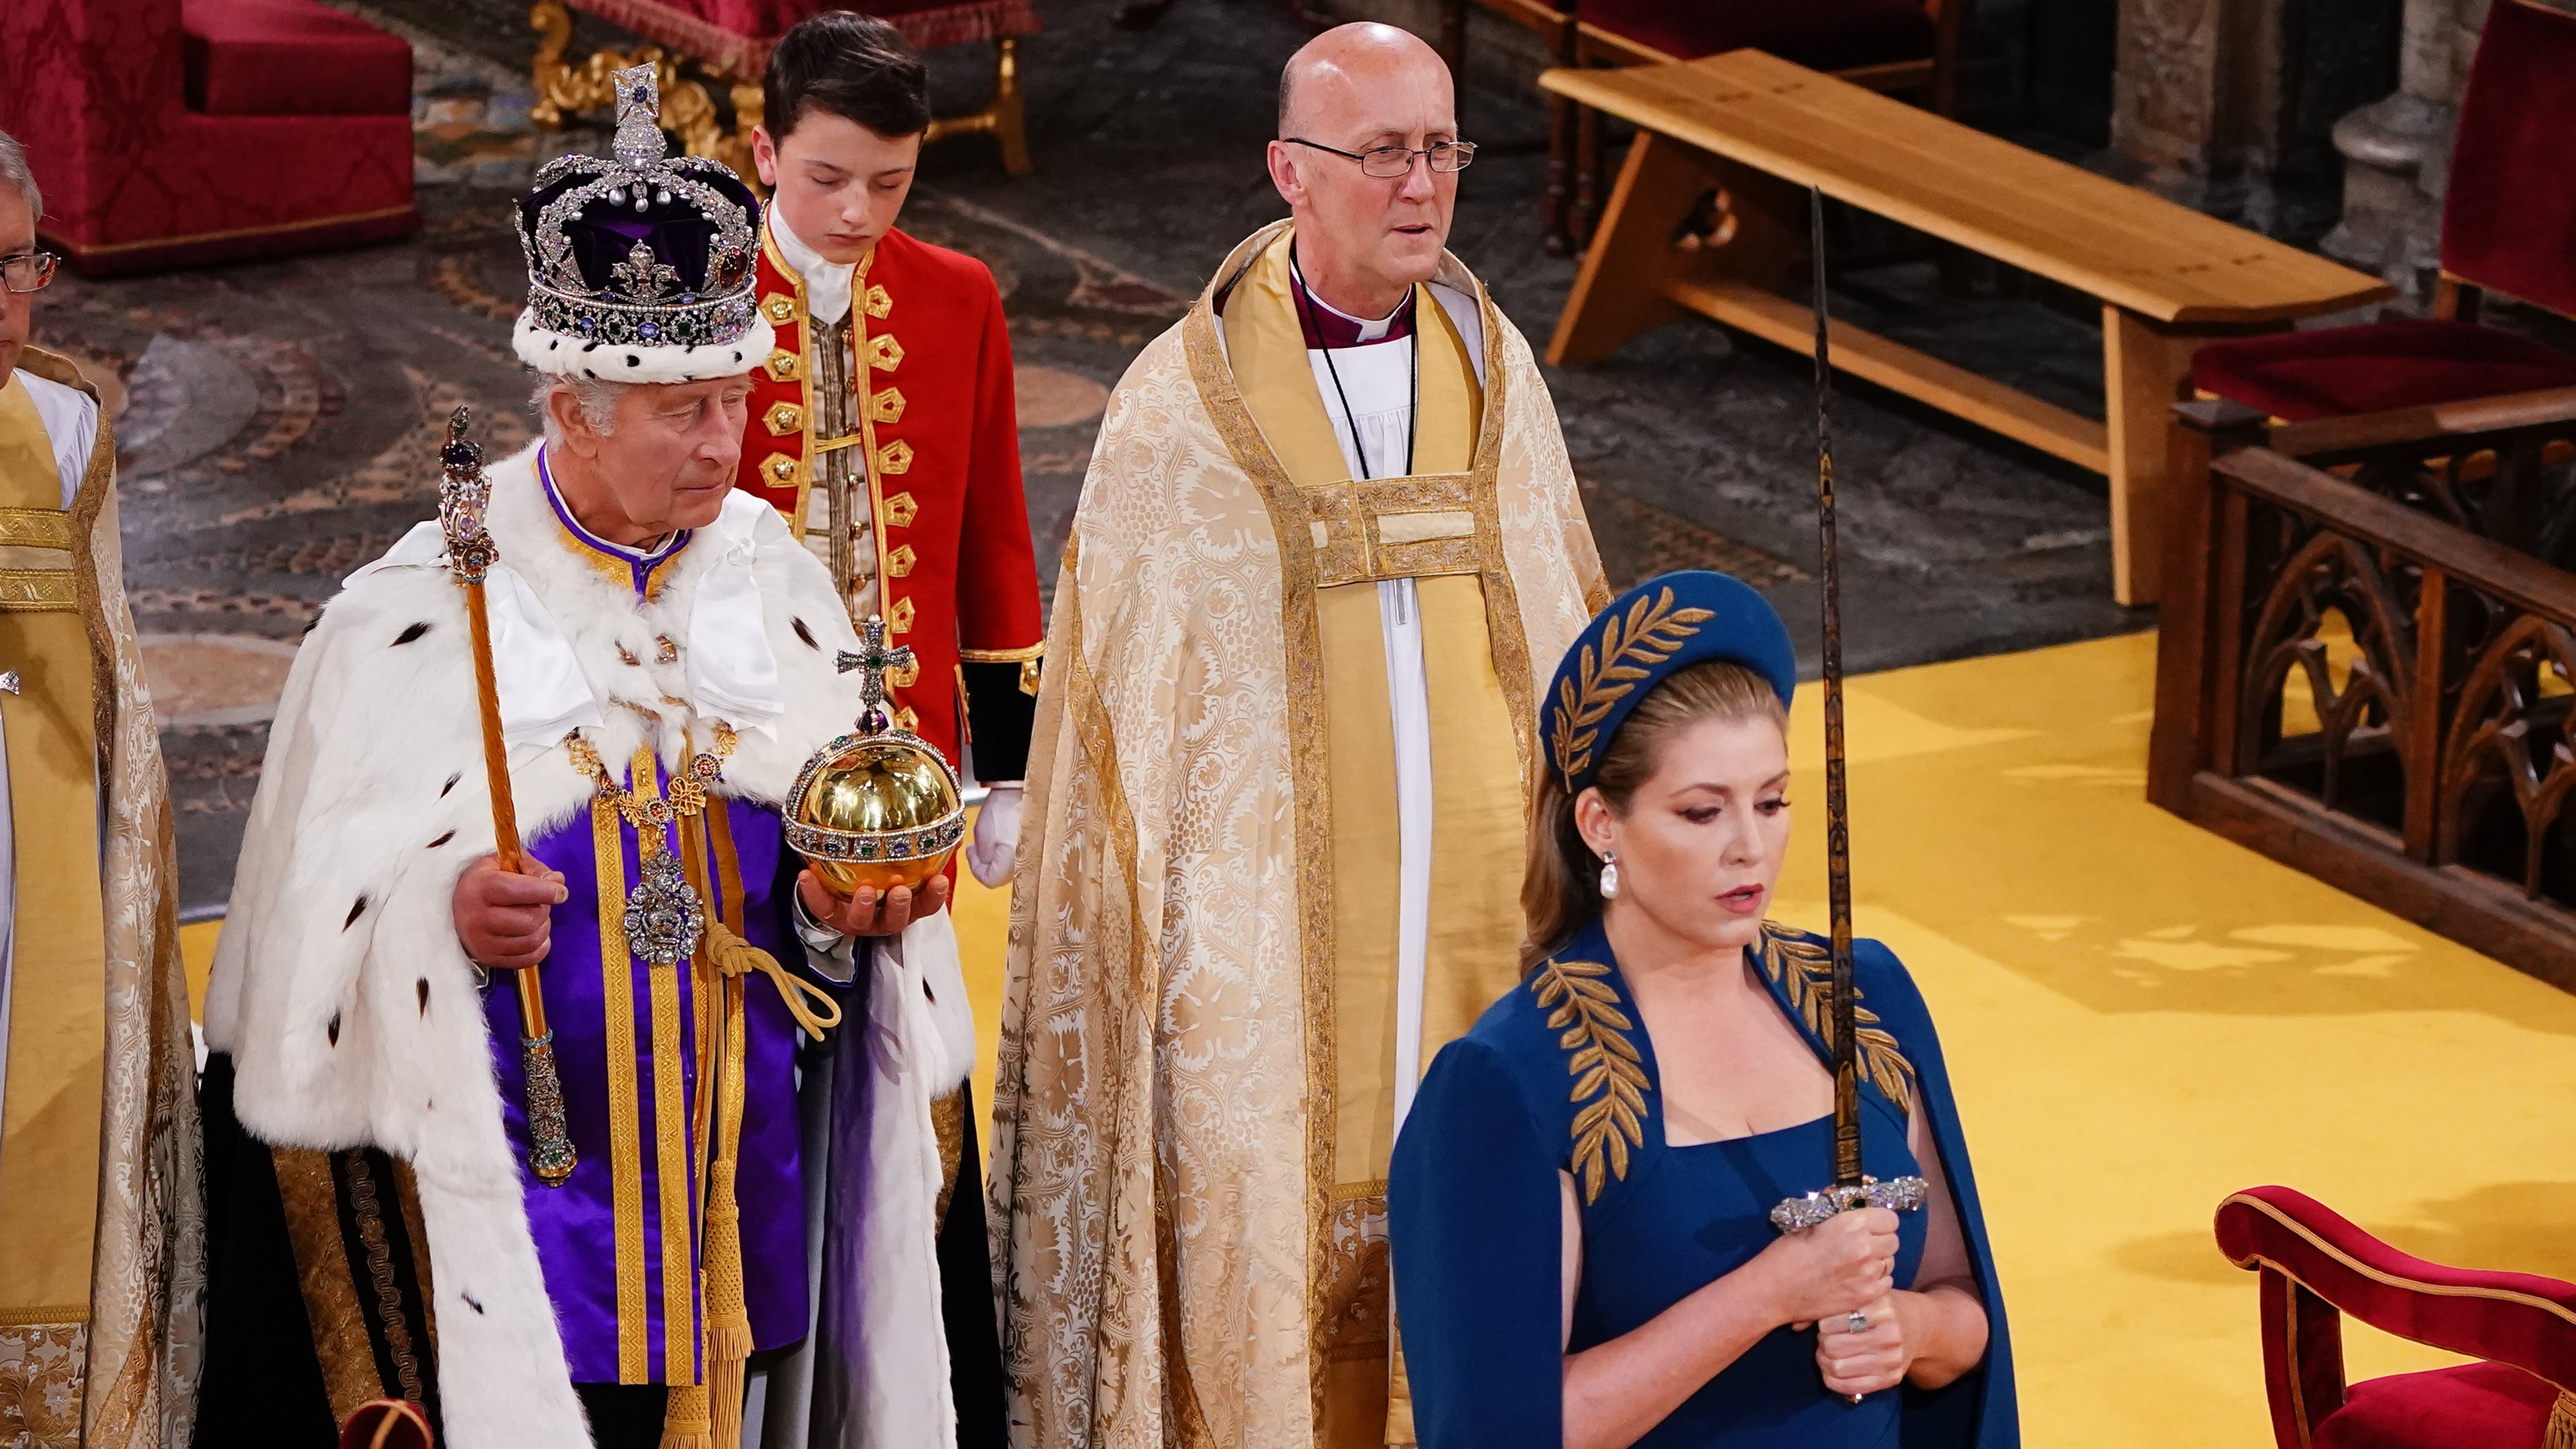 Lord President of the Council, Penny Mordaunt, holding the Sword of State walking ahead of King Charles III during his coronation ceremony in Westminster Abbey